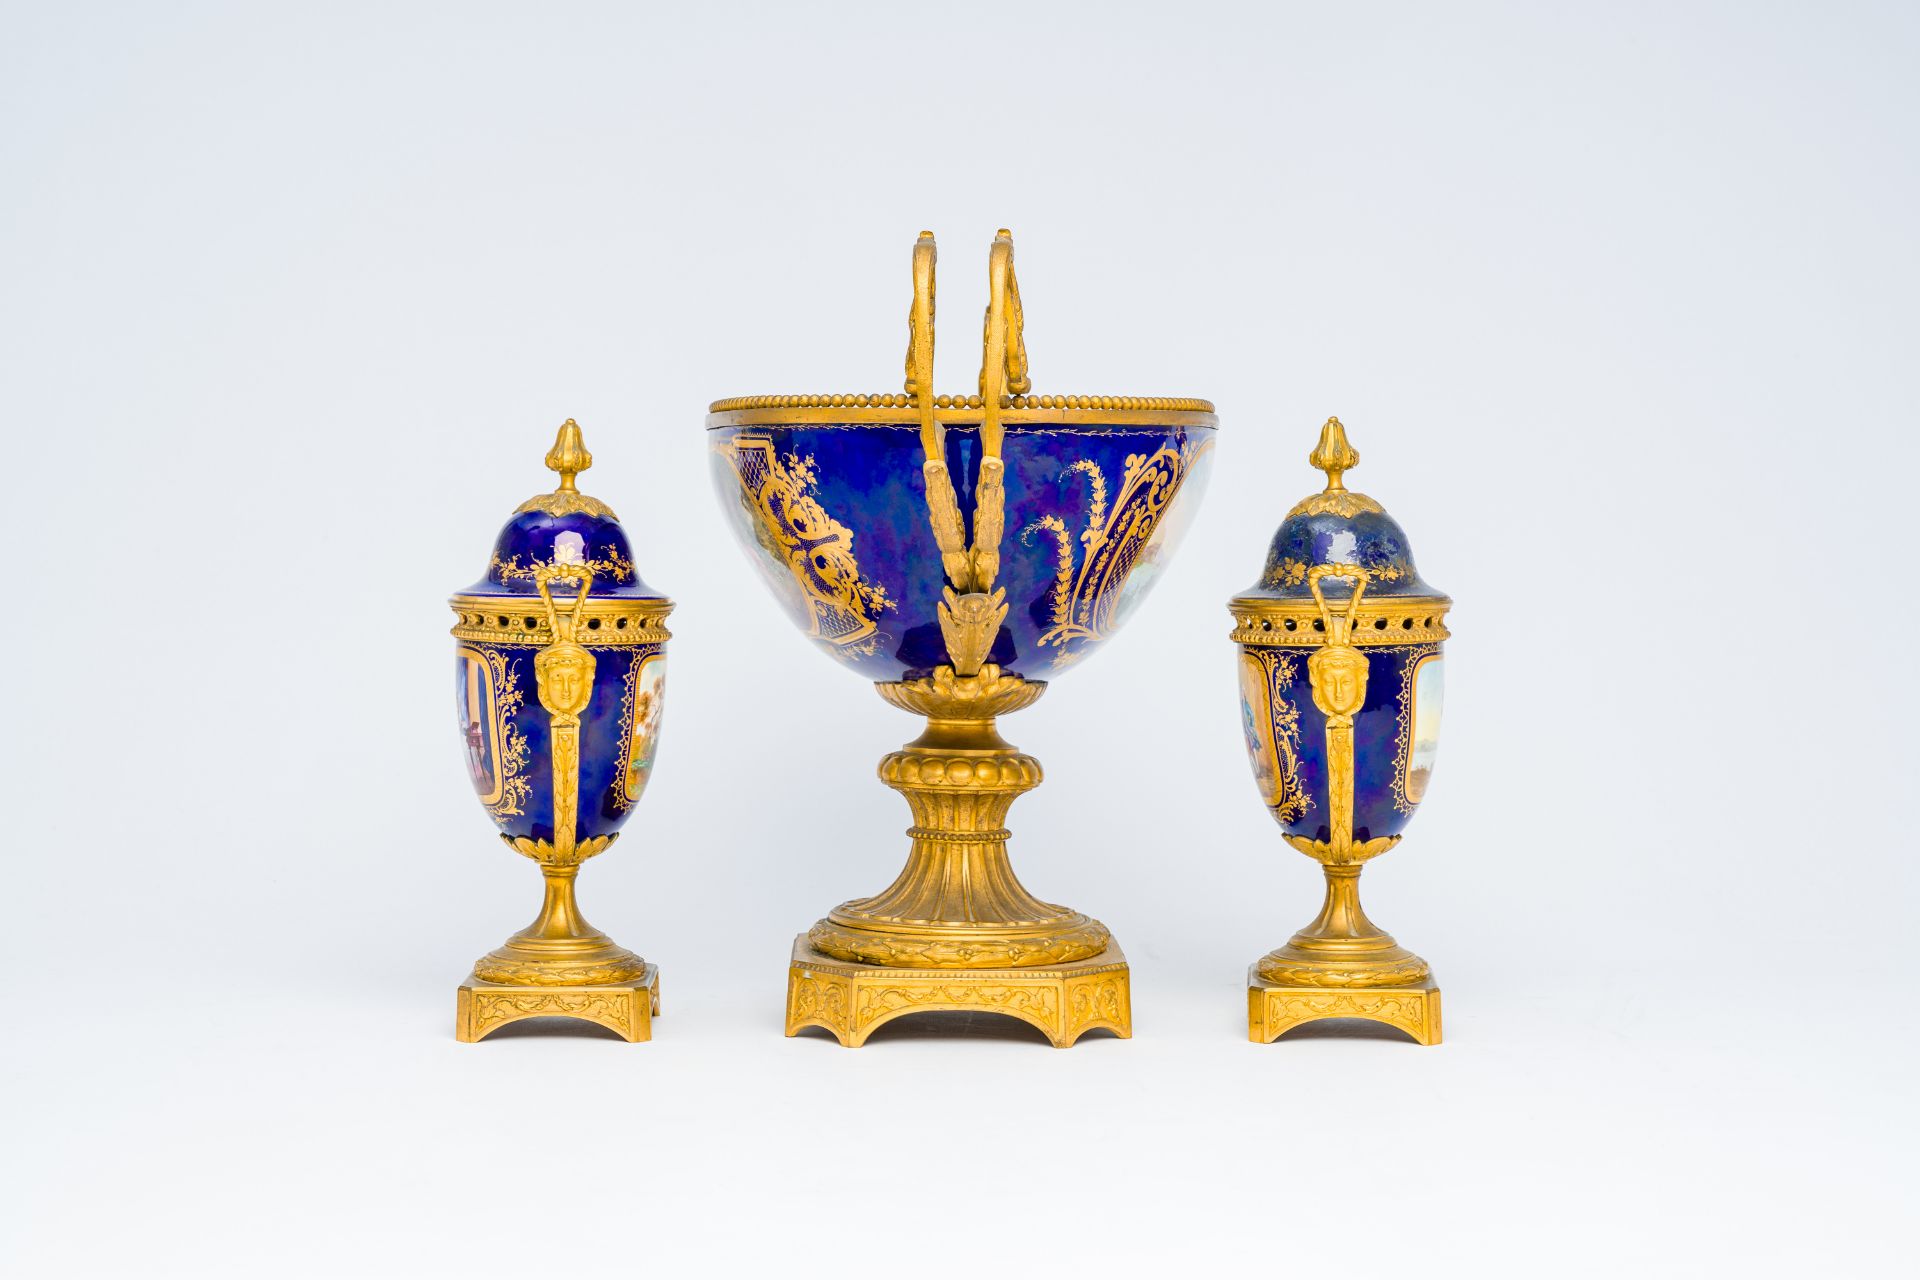 A three piece Sevres-style porcelain garniture with gilt bronze mounts, France, 19th C. - Image 4 of 7